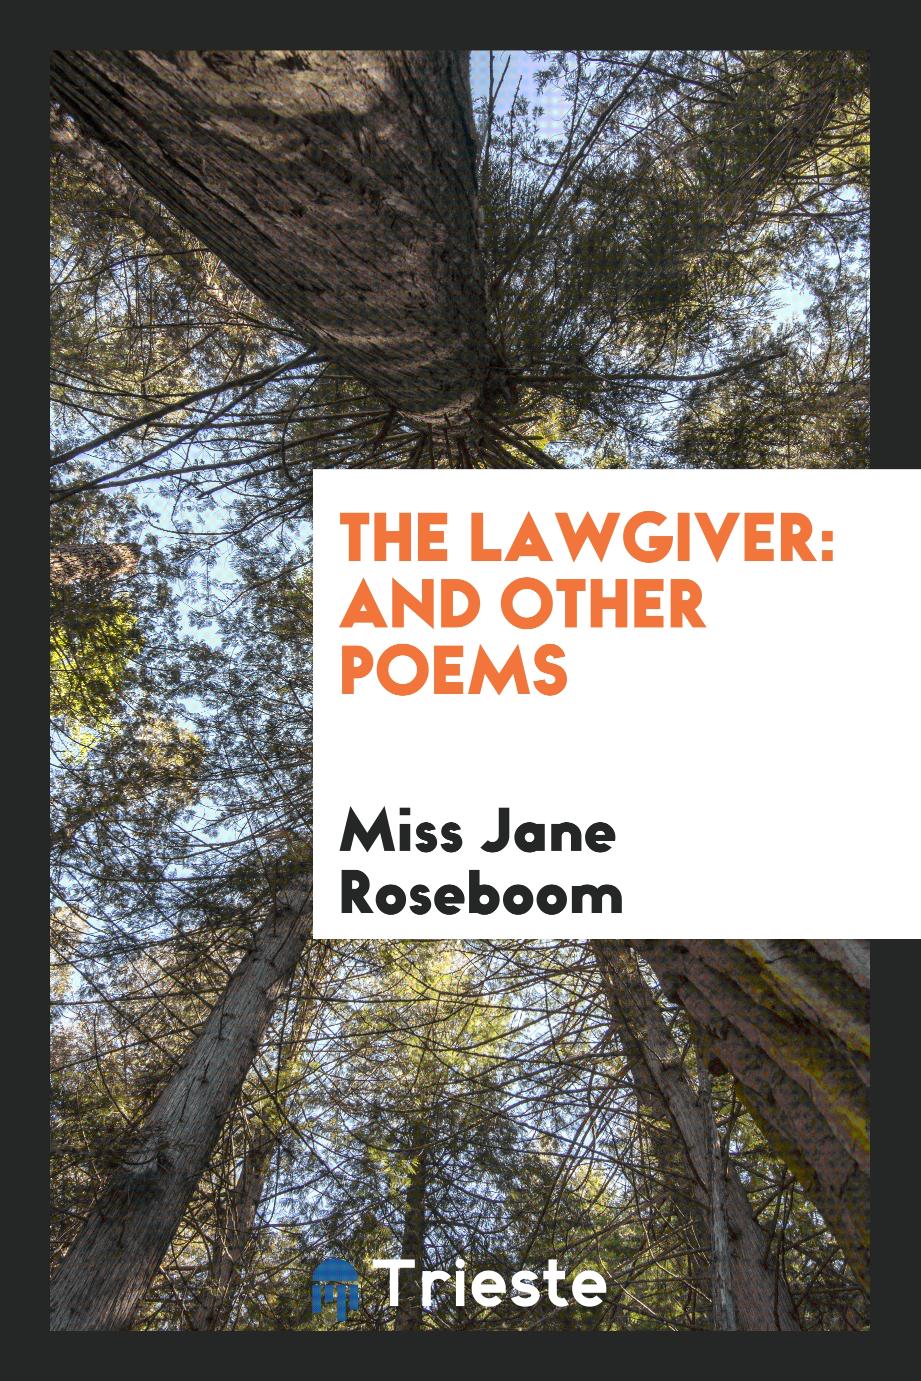 The Lawgiver: And Other Poems